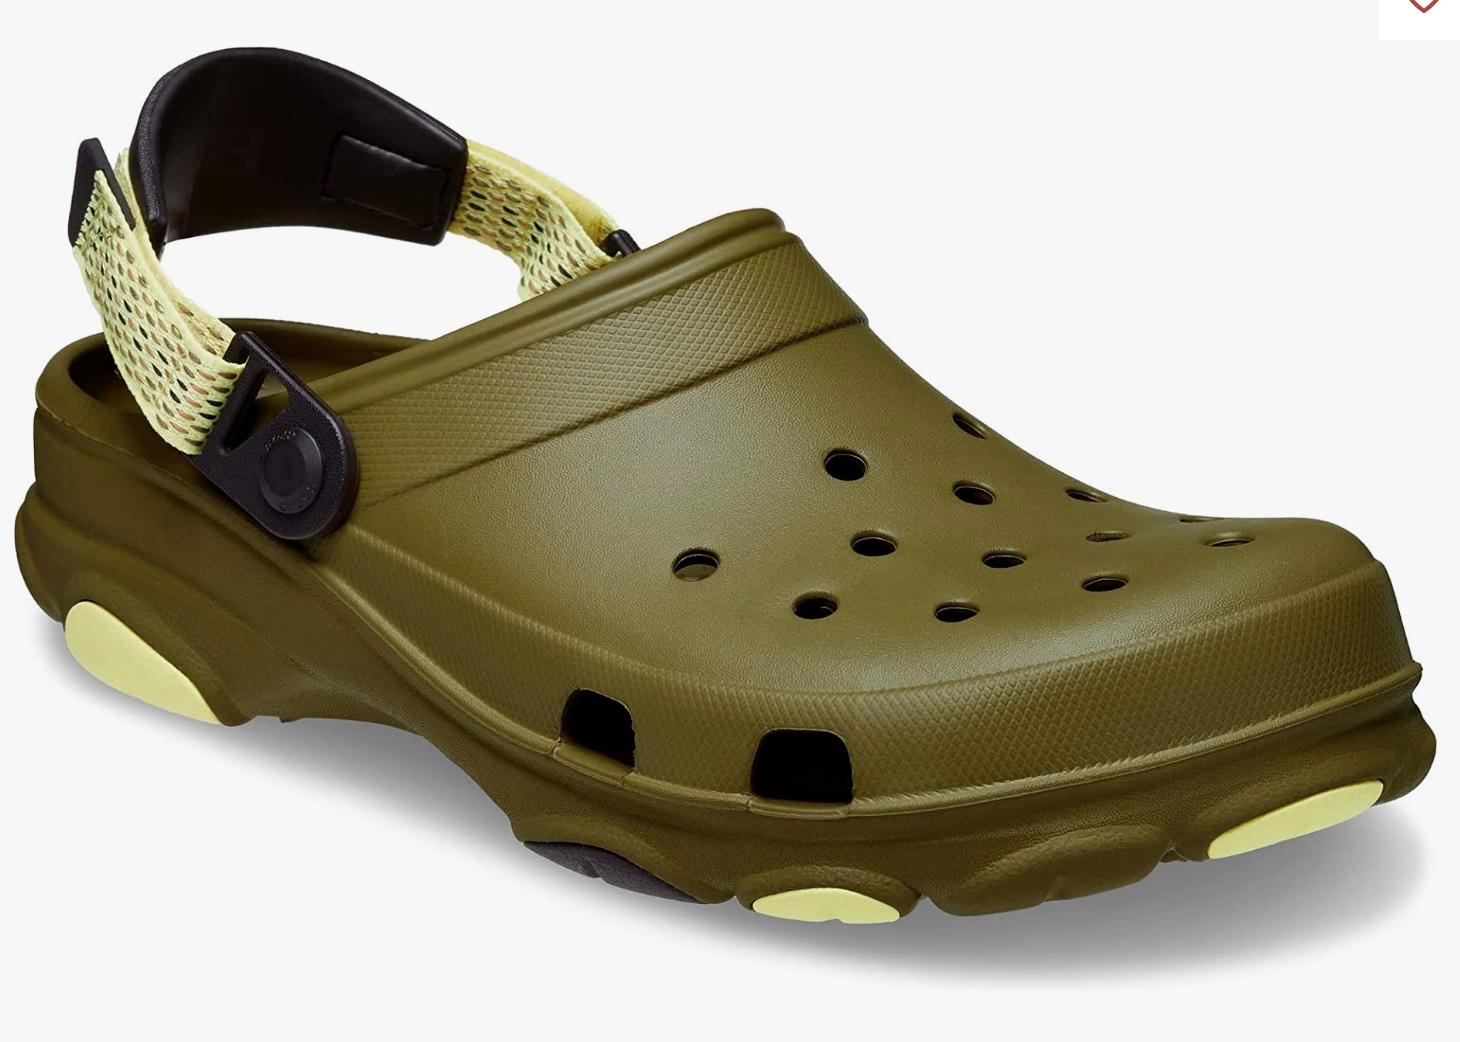 Crocs Classic All-Terrain Clog Shoes for $27.48 Shipped